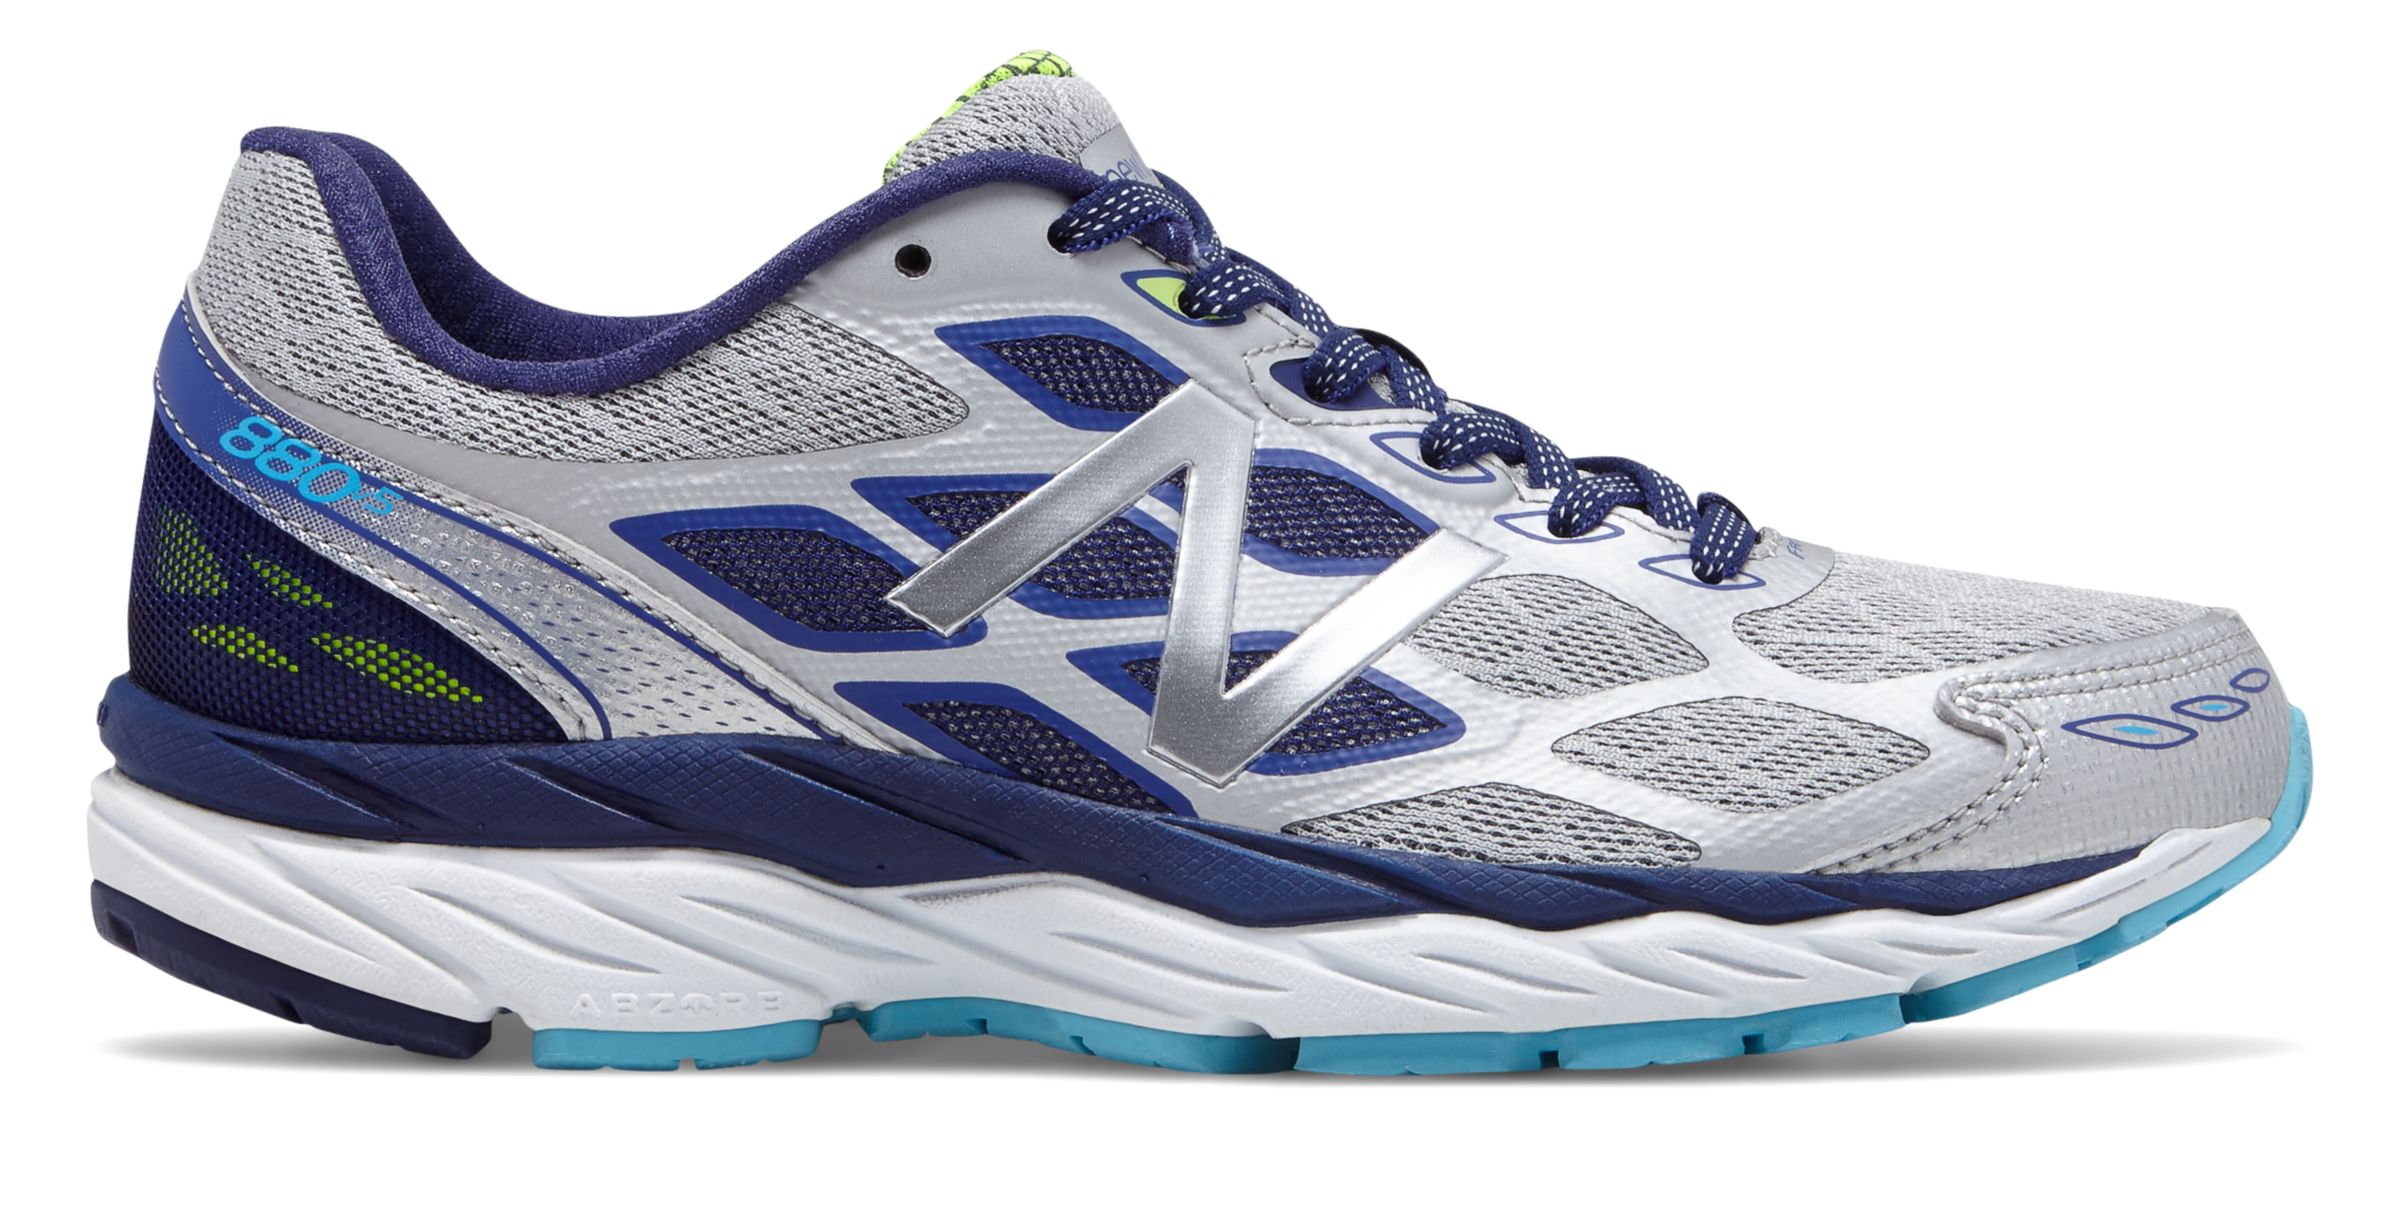 New Balance W880-V5 on Sale - Discounts Up to 65% Off on W880MI5 at Joe's  New Balance Outlet